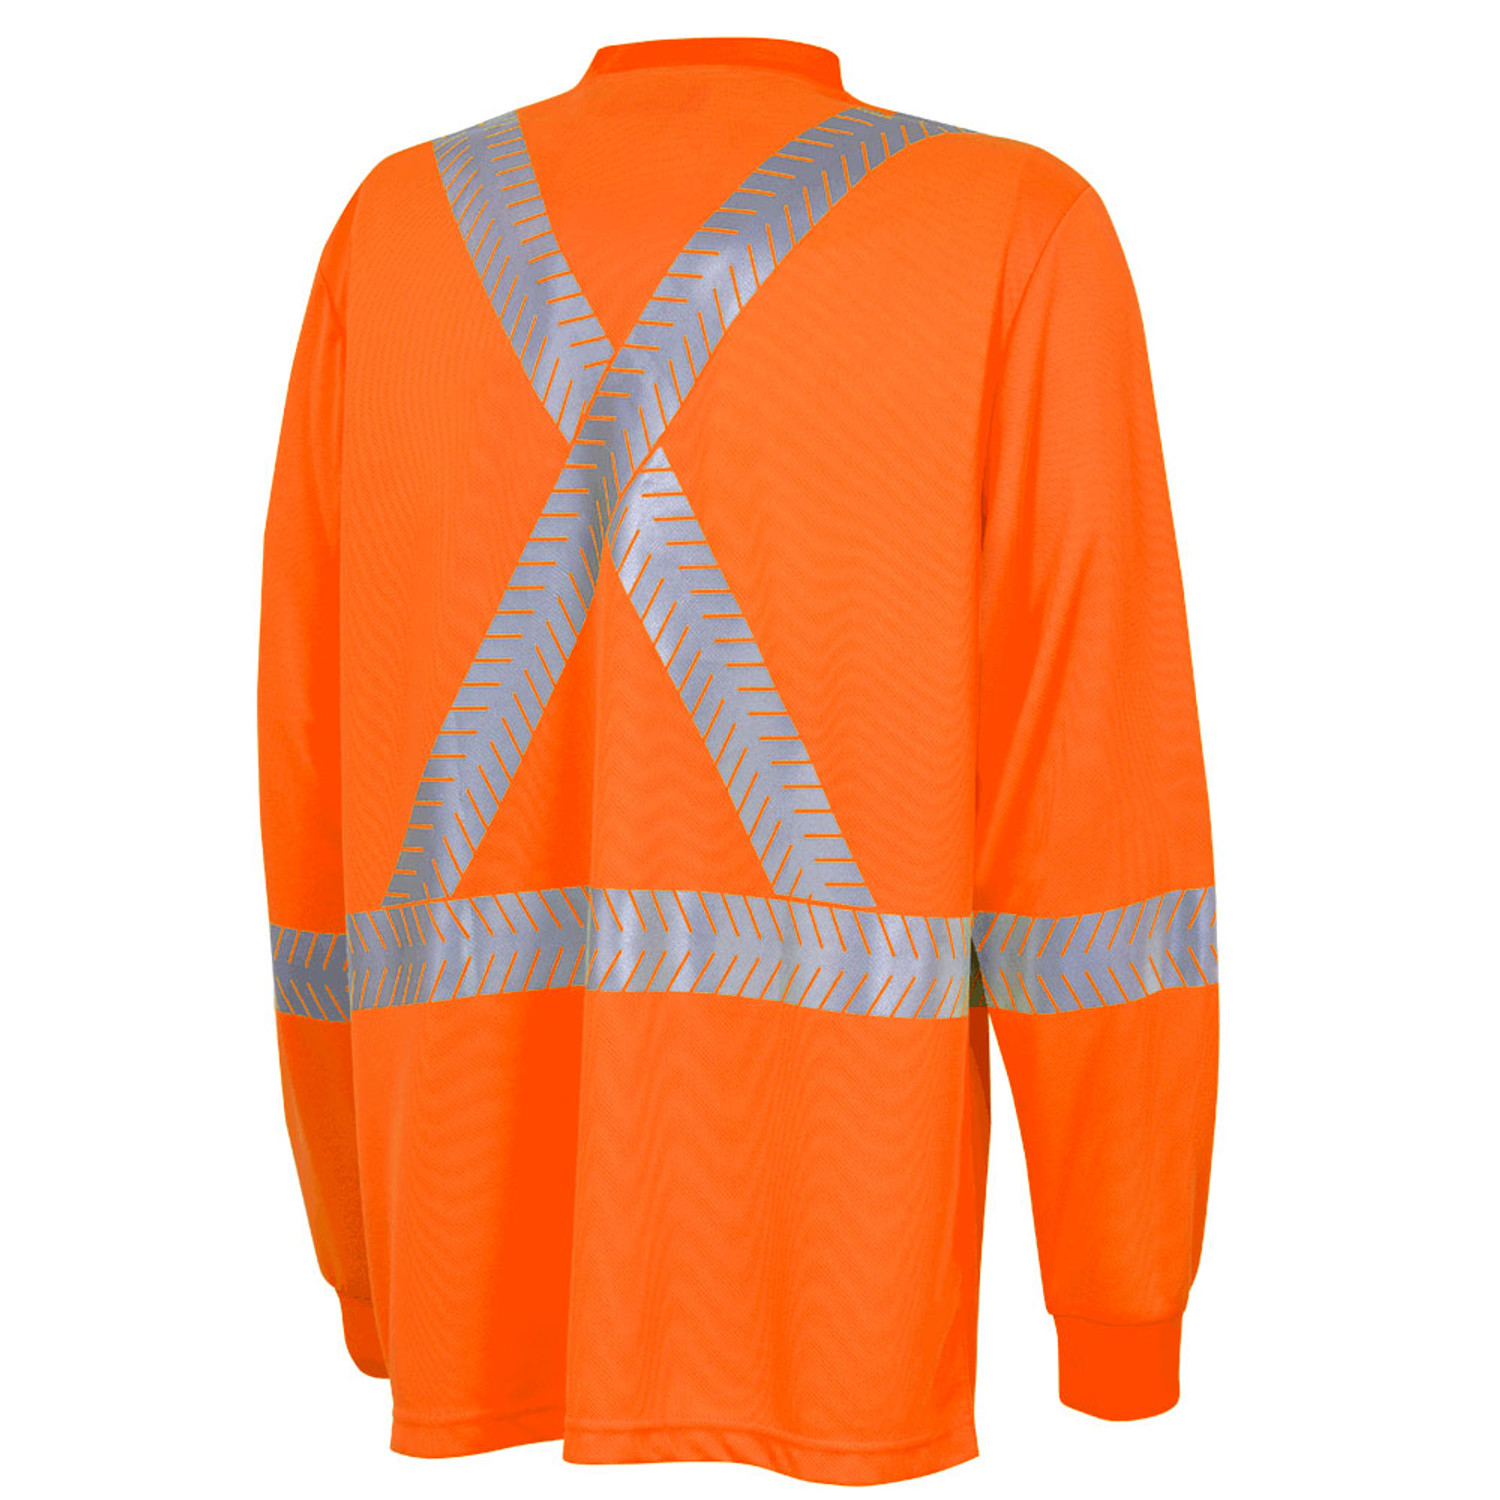 https://cdn11.bigcommerce.com/s-10f42/images/stencil/1500x1500/products/2321/6250/pioneer-uv-protection-long-sleeve-shirt-safetywear.ca-back__68708.1631216092.jpg?c=2?imbypass=on